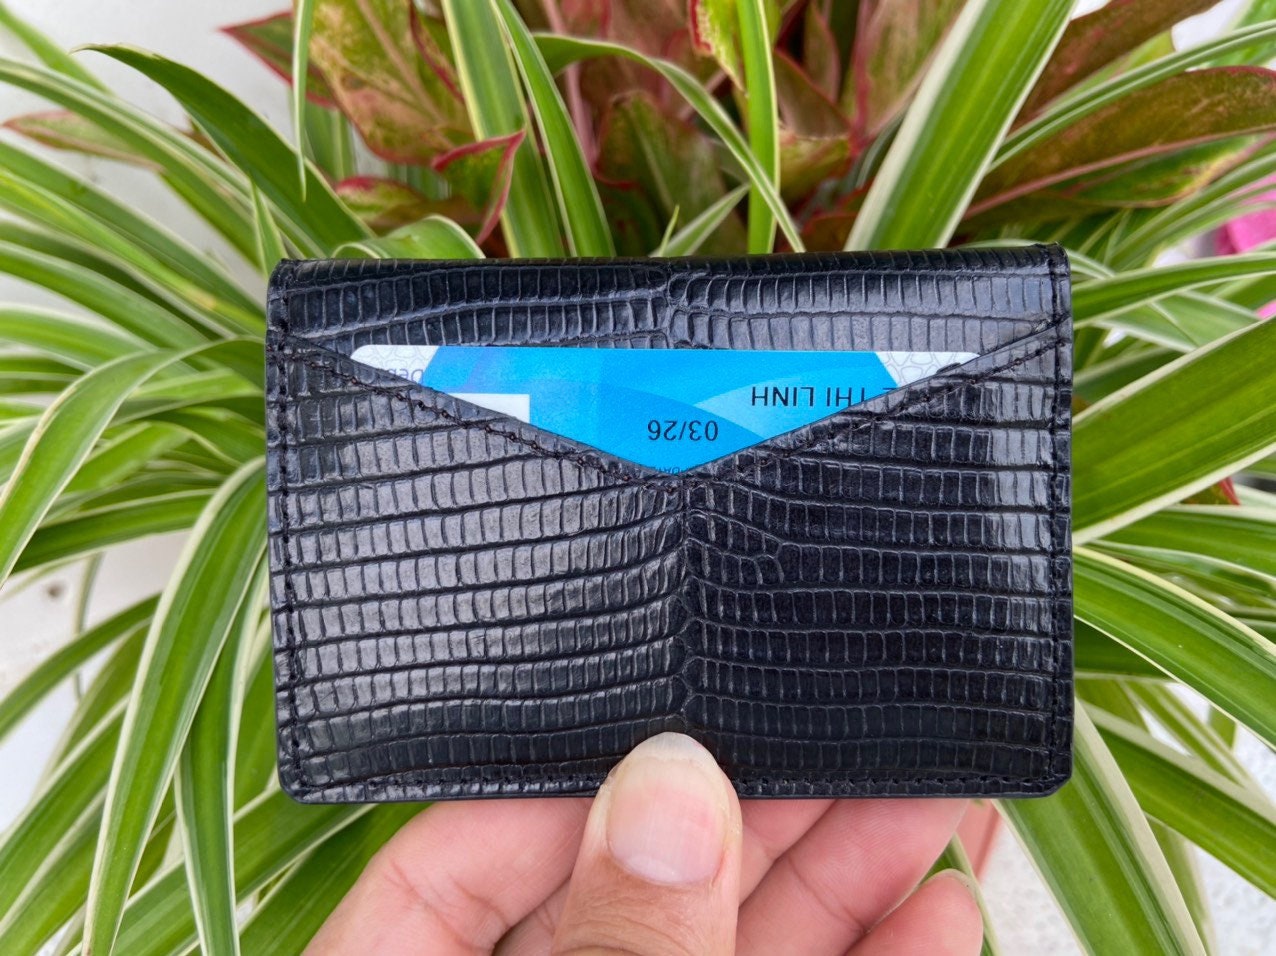 Black Genuine Lizard Credit Cardholder, Wallet for Men, Gift for Him,  Leather Lizard Card Cases, Leather Lizard Card Cover 